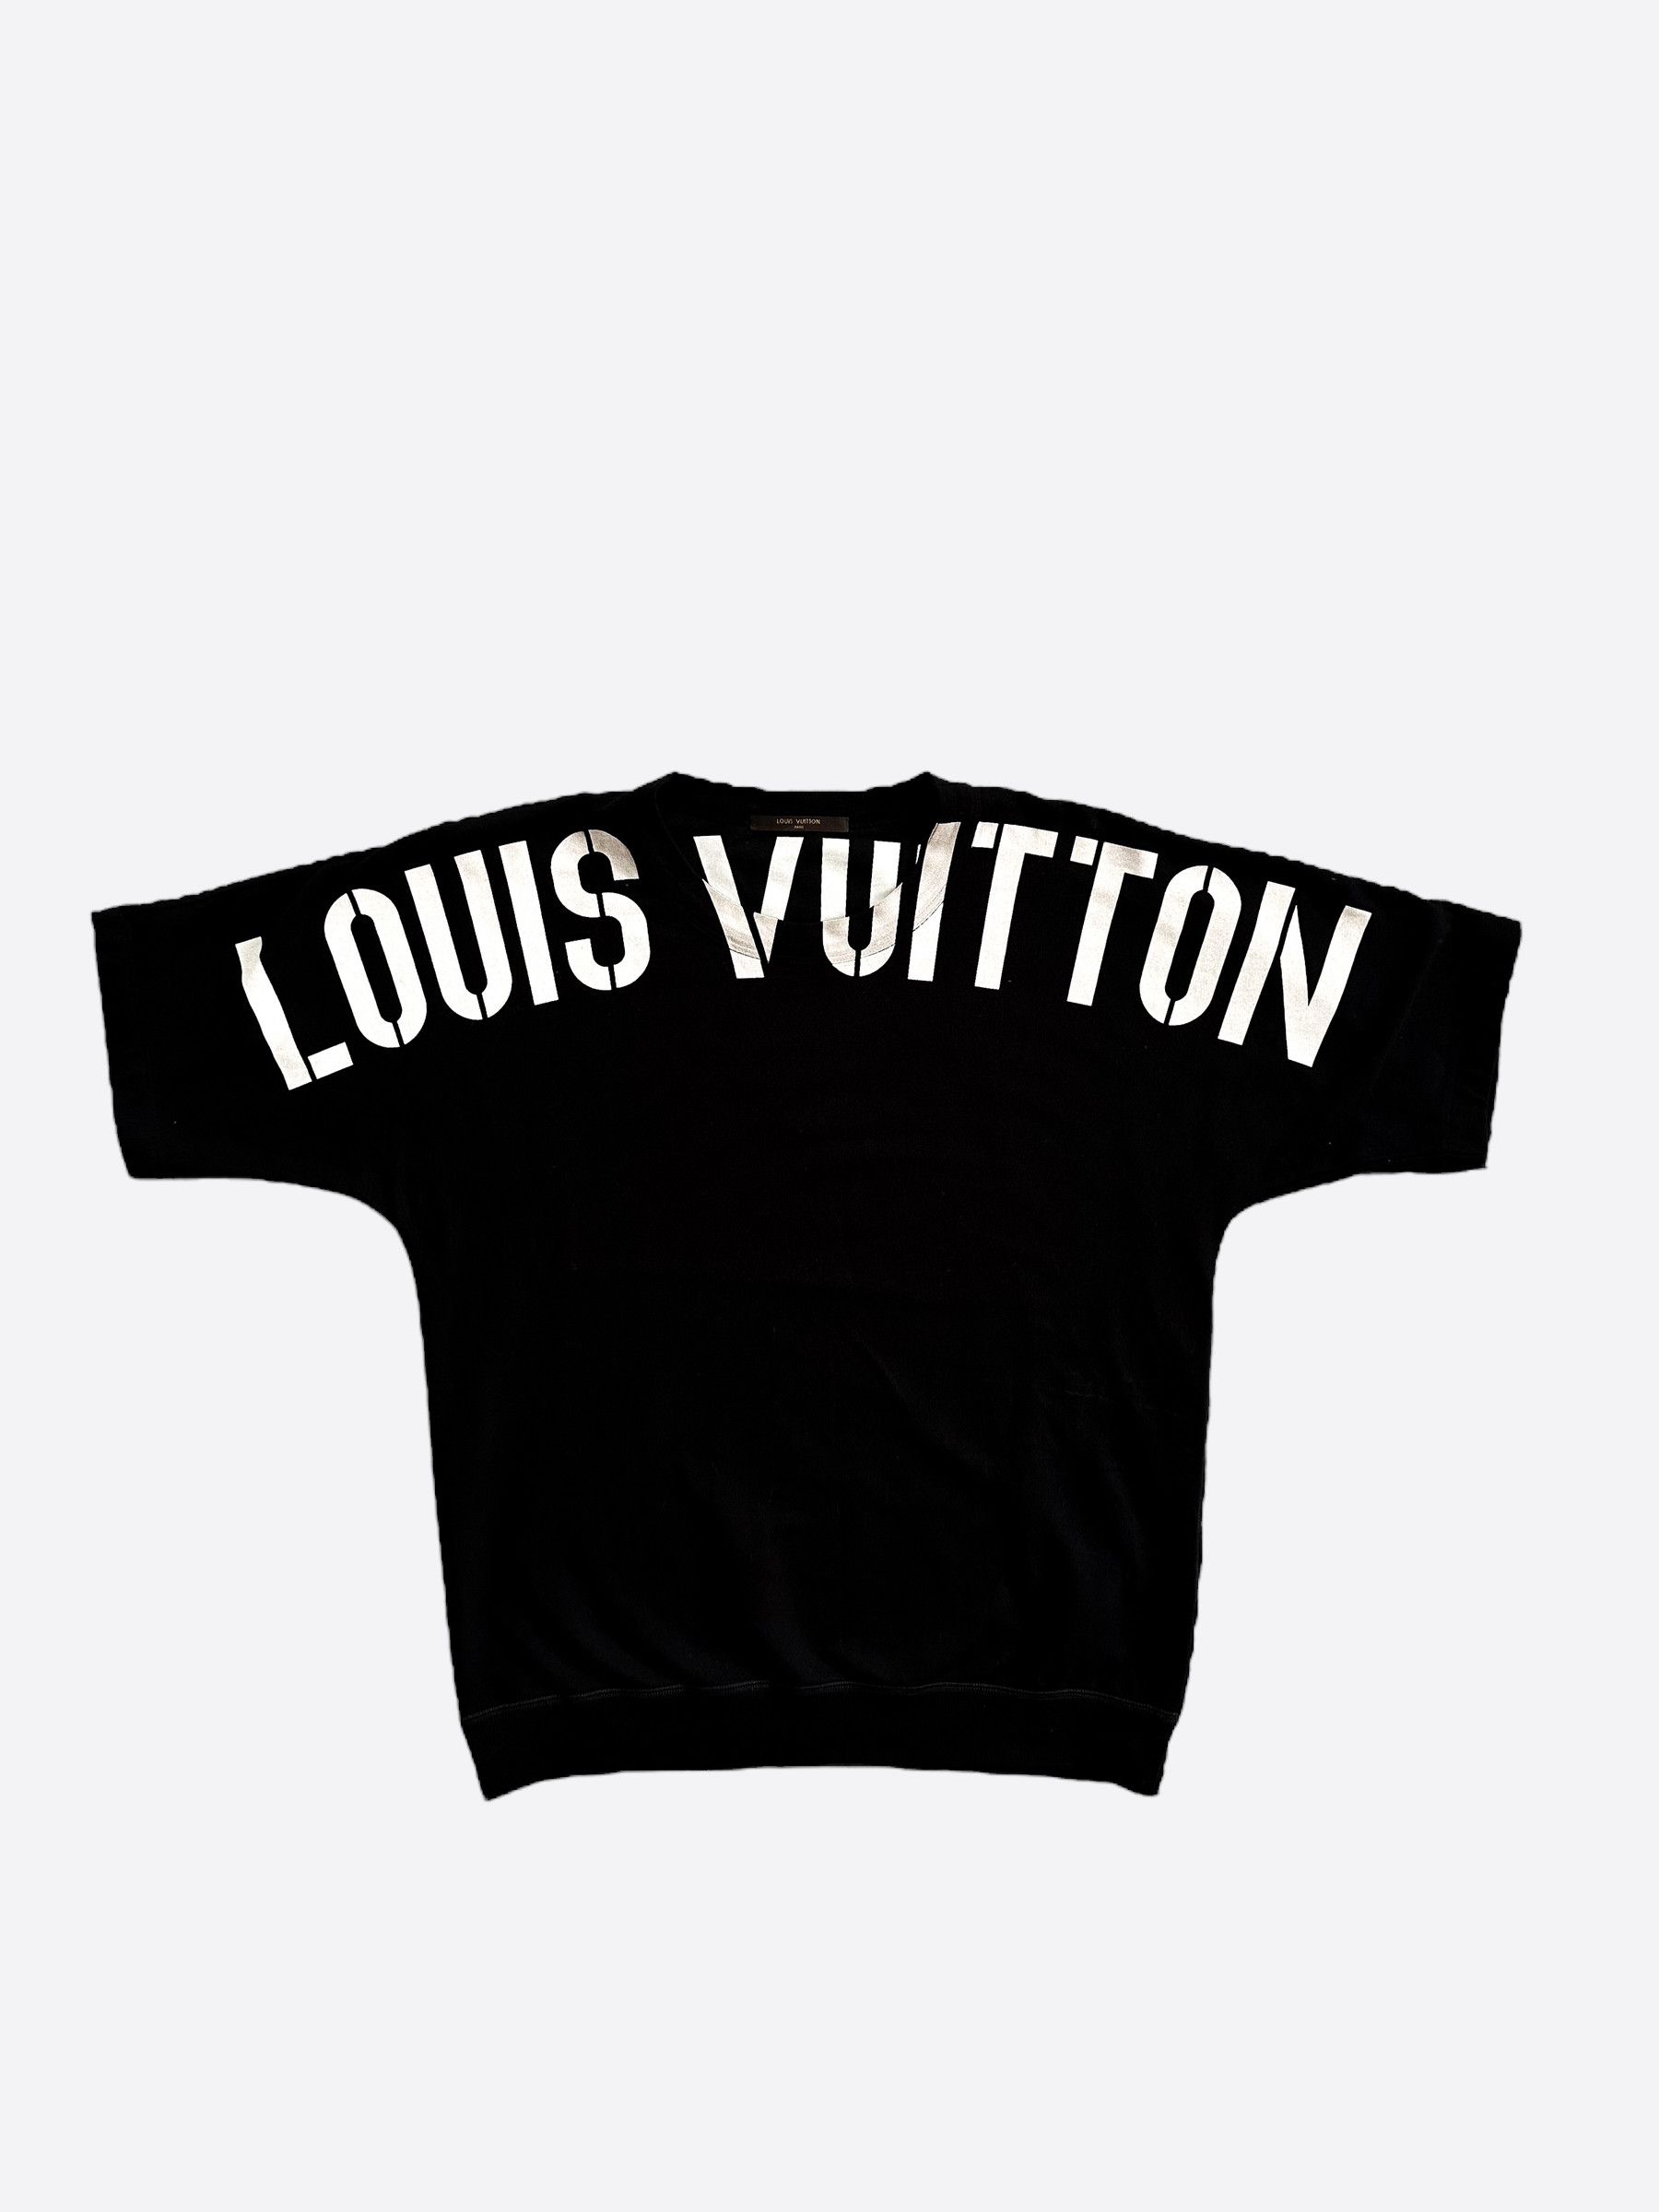 Louis Vuitton Louis Vuitton Peace and Love Knit Sweater FW18